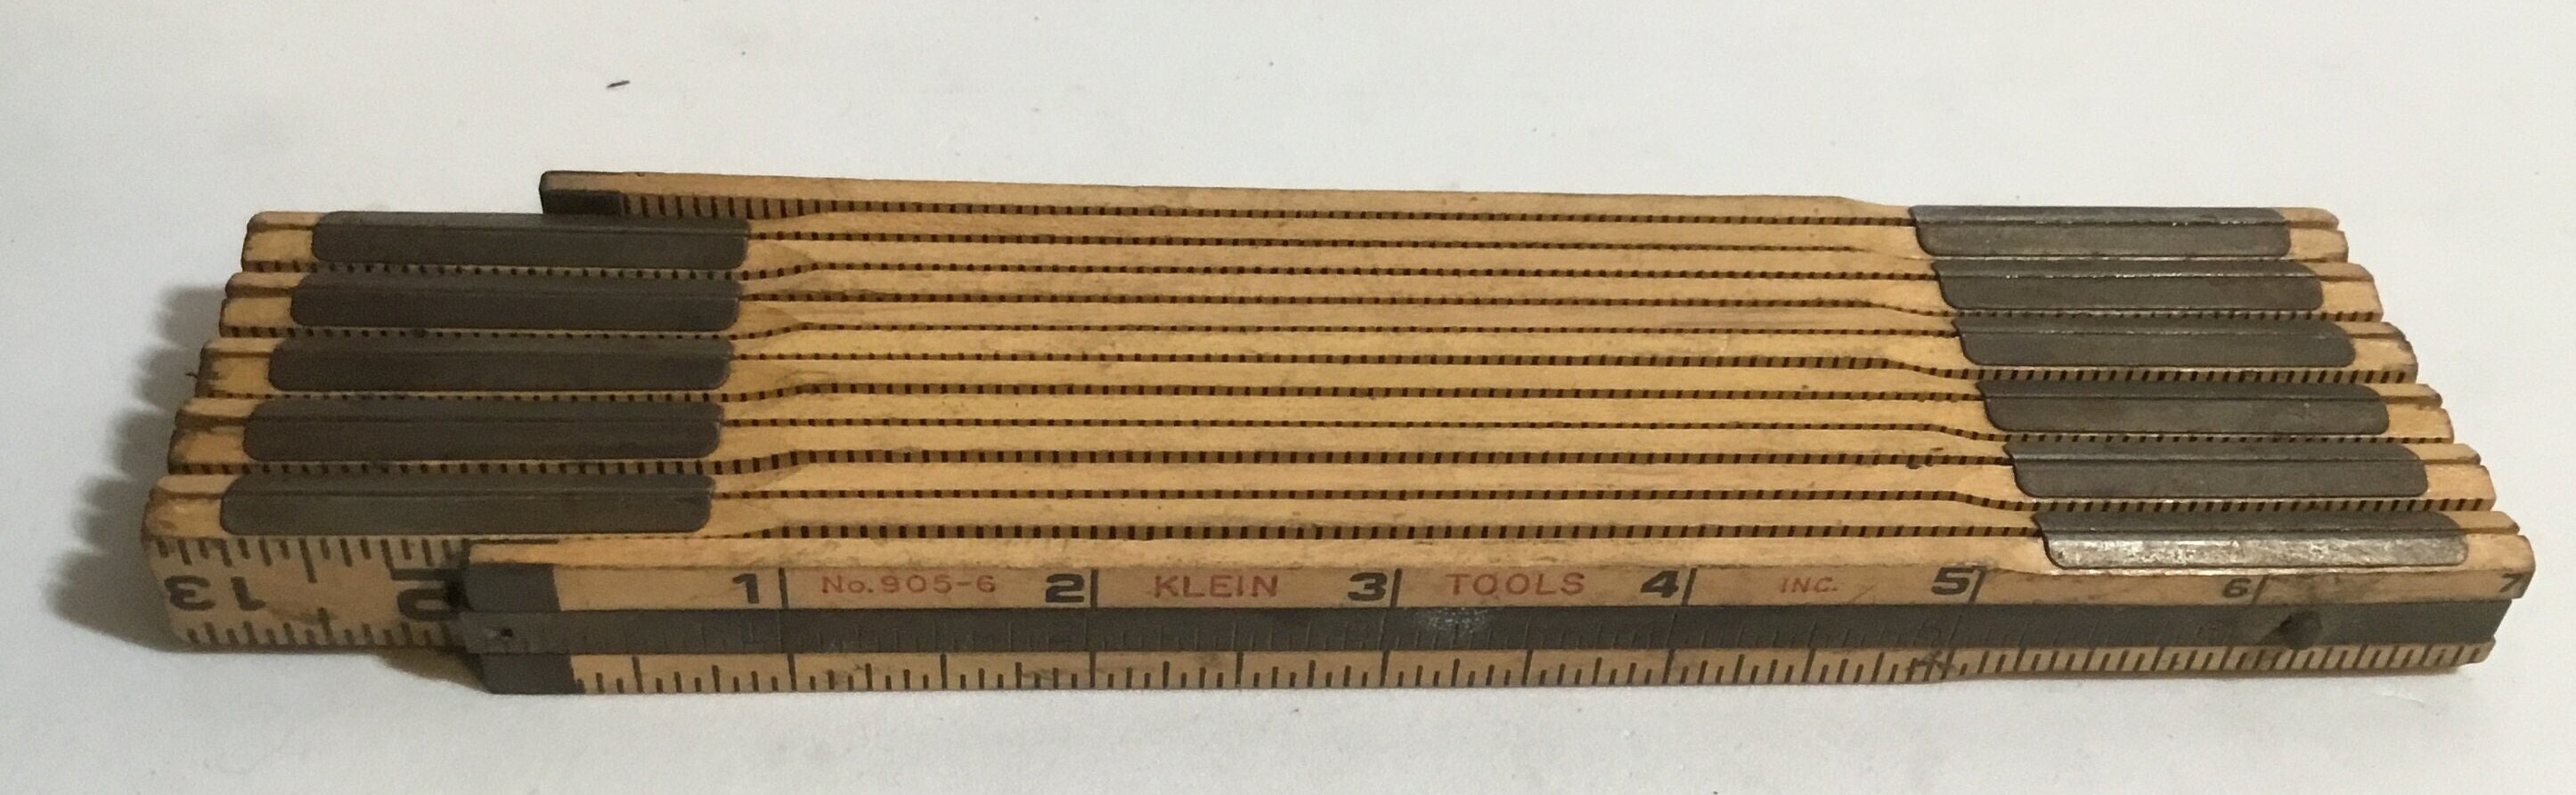 Klein Tools 905-6 - Wood Folding Rule with Extension